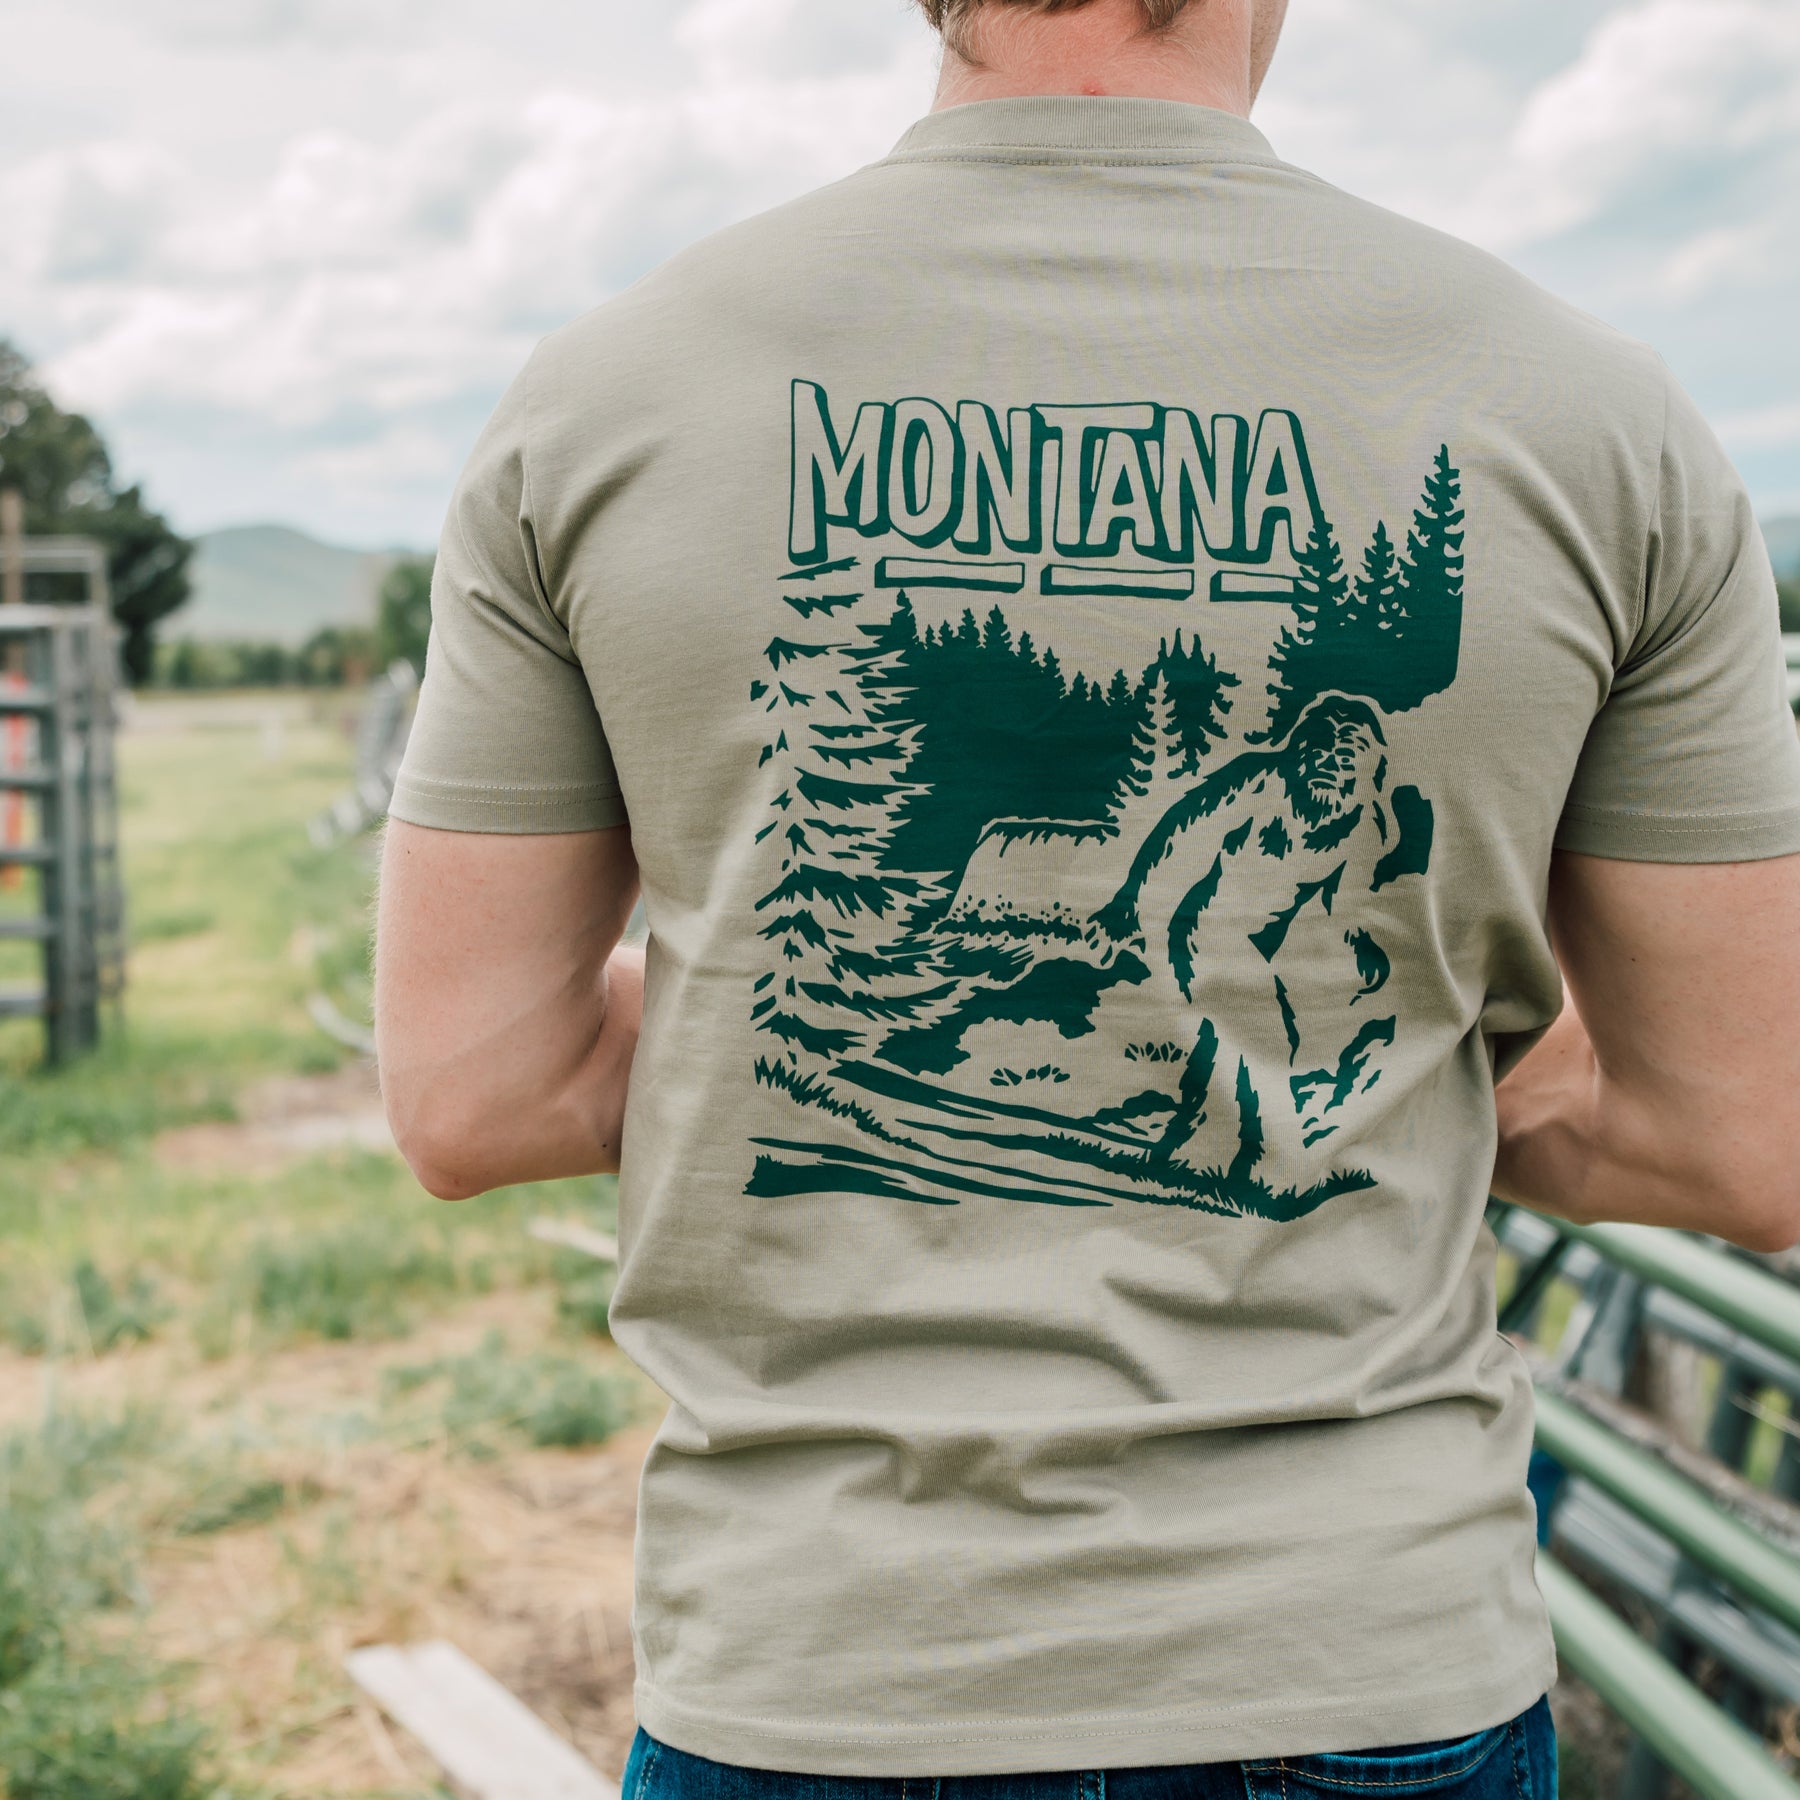 Stickers Archives - Montana Wild